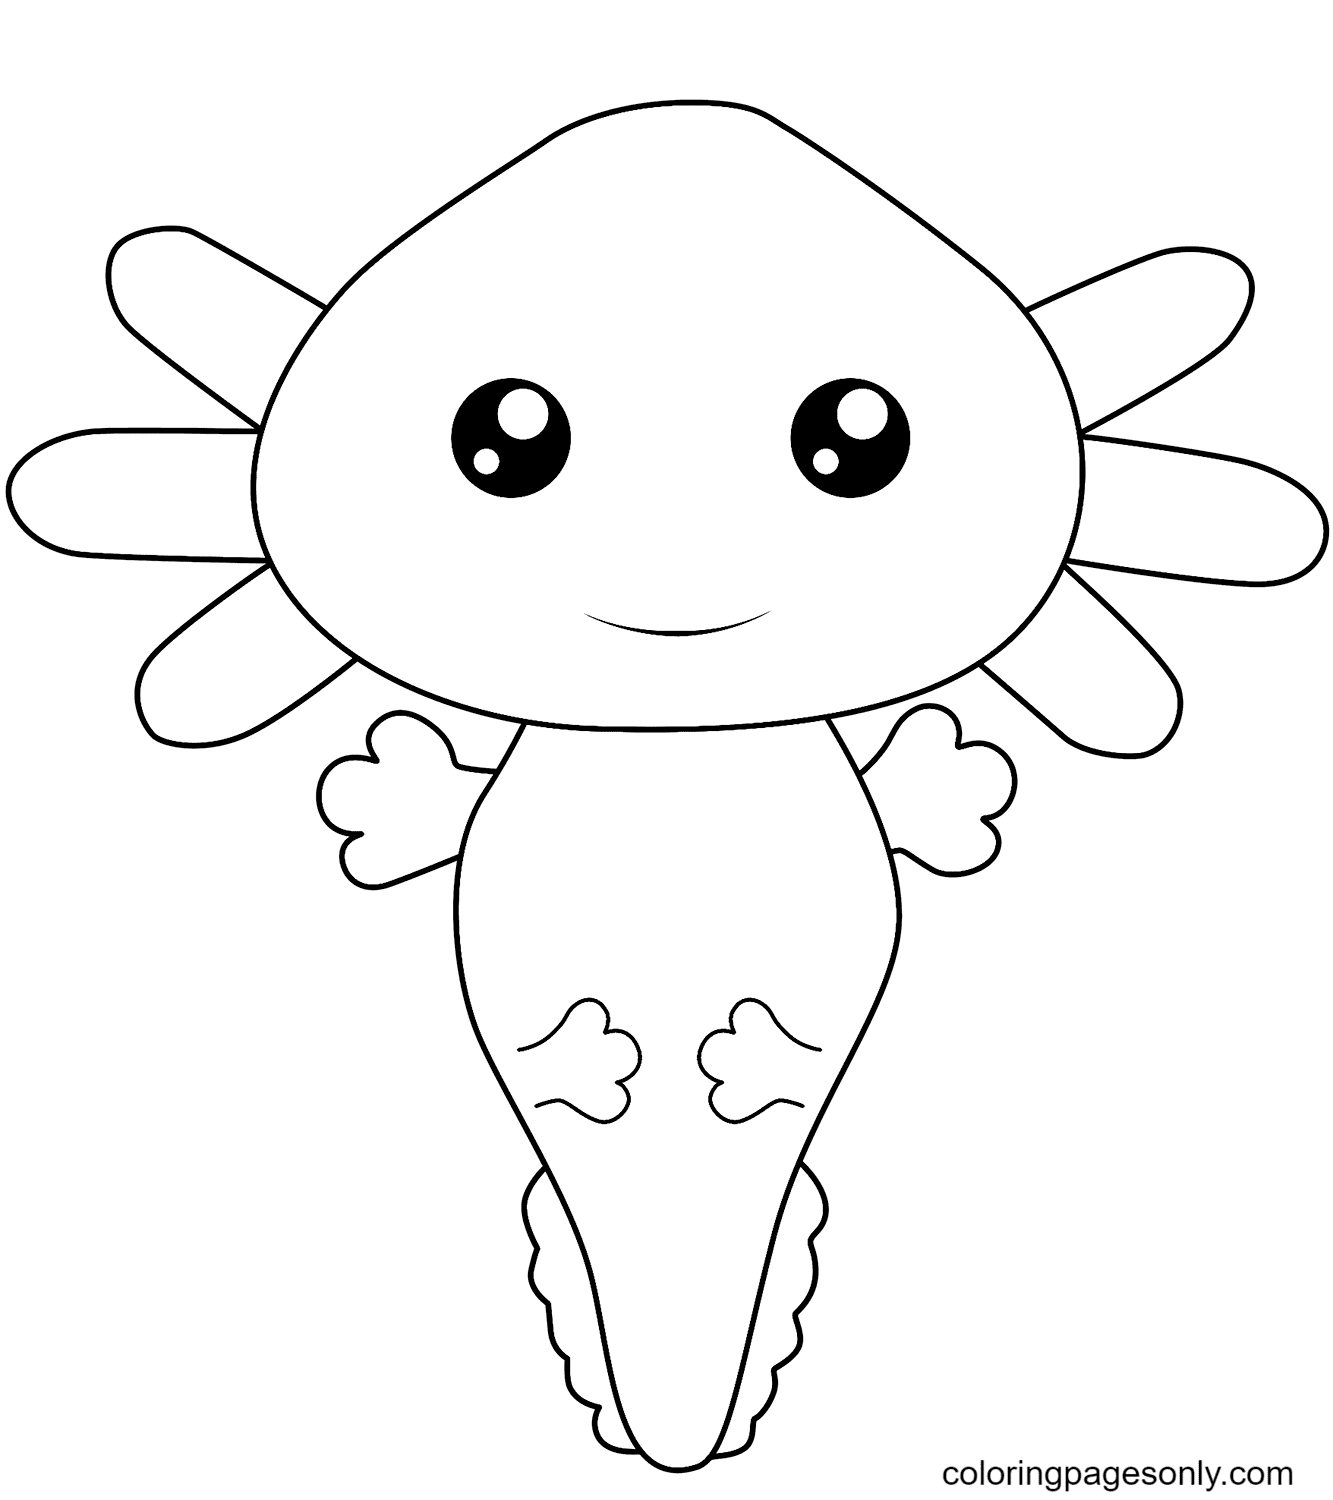 New Coloring Pages - Coloring Pages For Kids And Adults